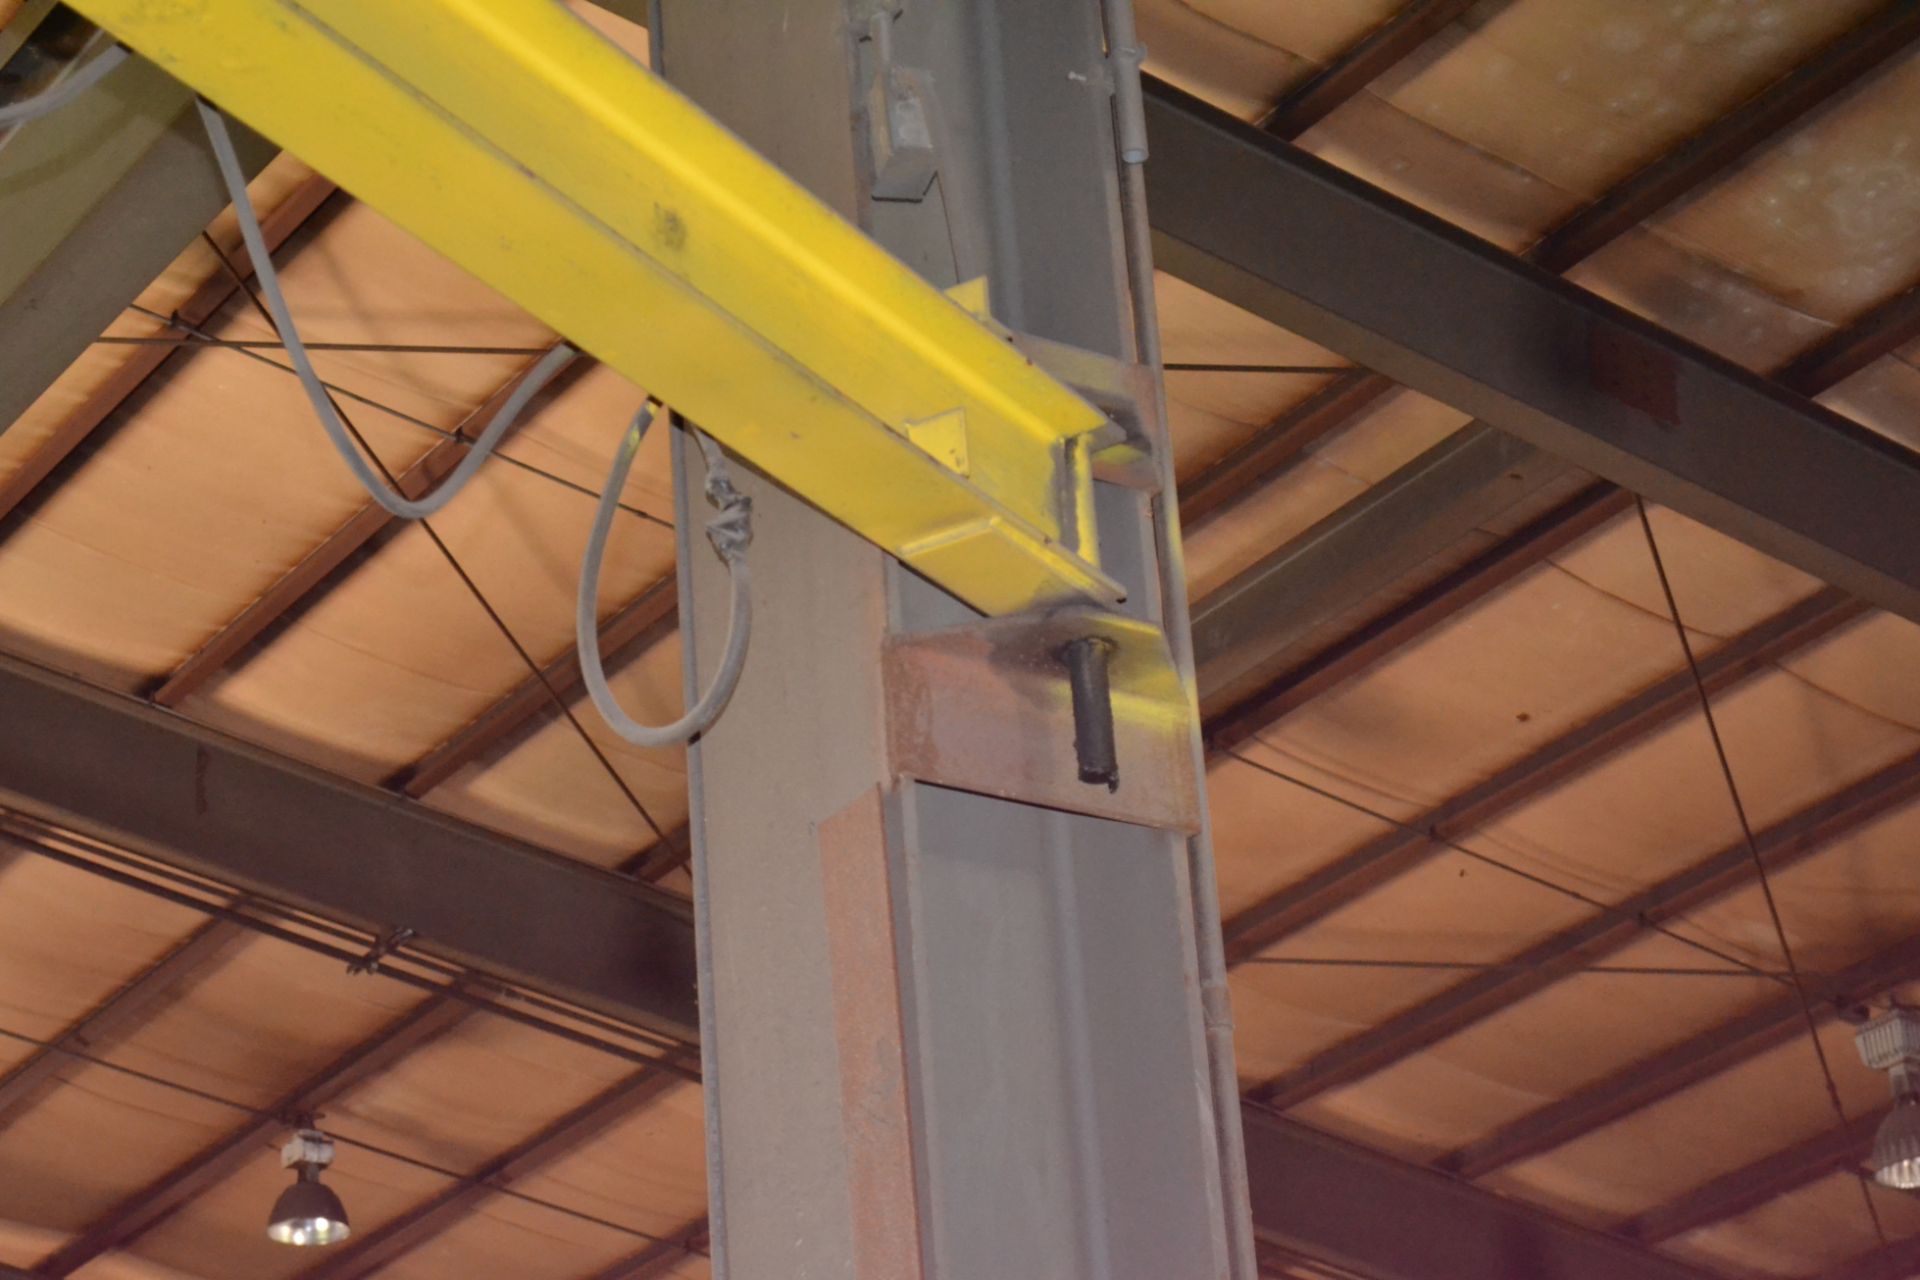 1-Ton Post Mounted Jib Crane, Approximately 12', With 1-Ton Coffing Electric Hoist - Image 3 of 3